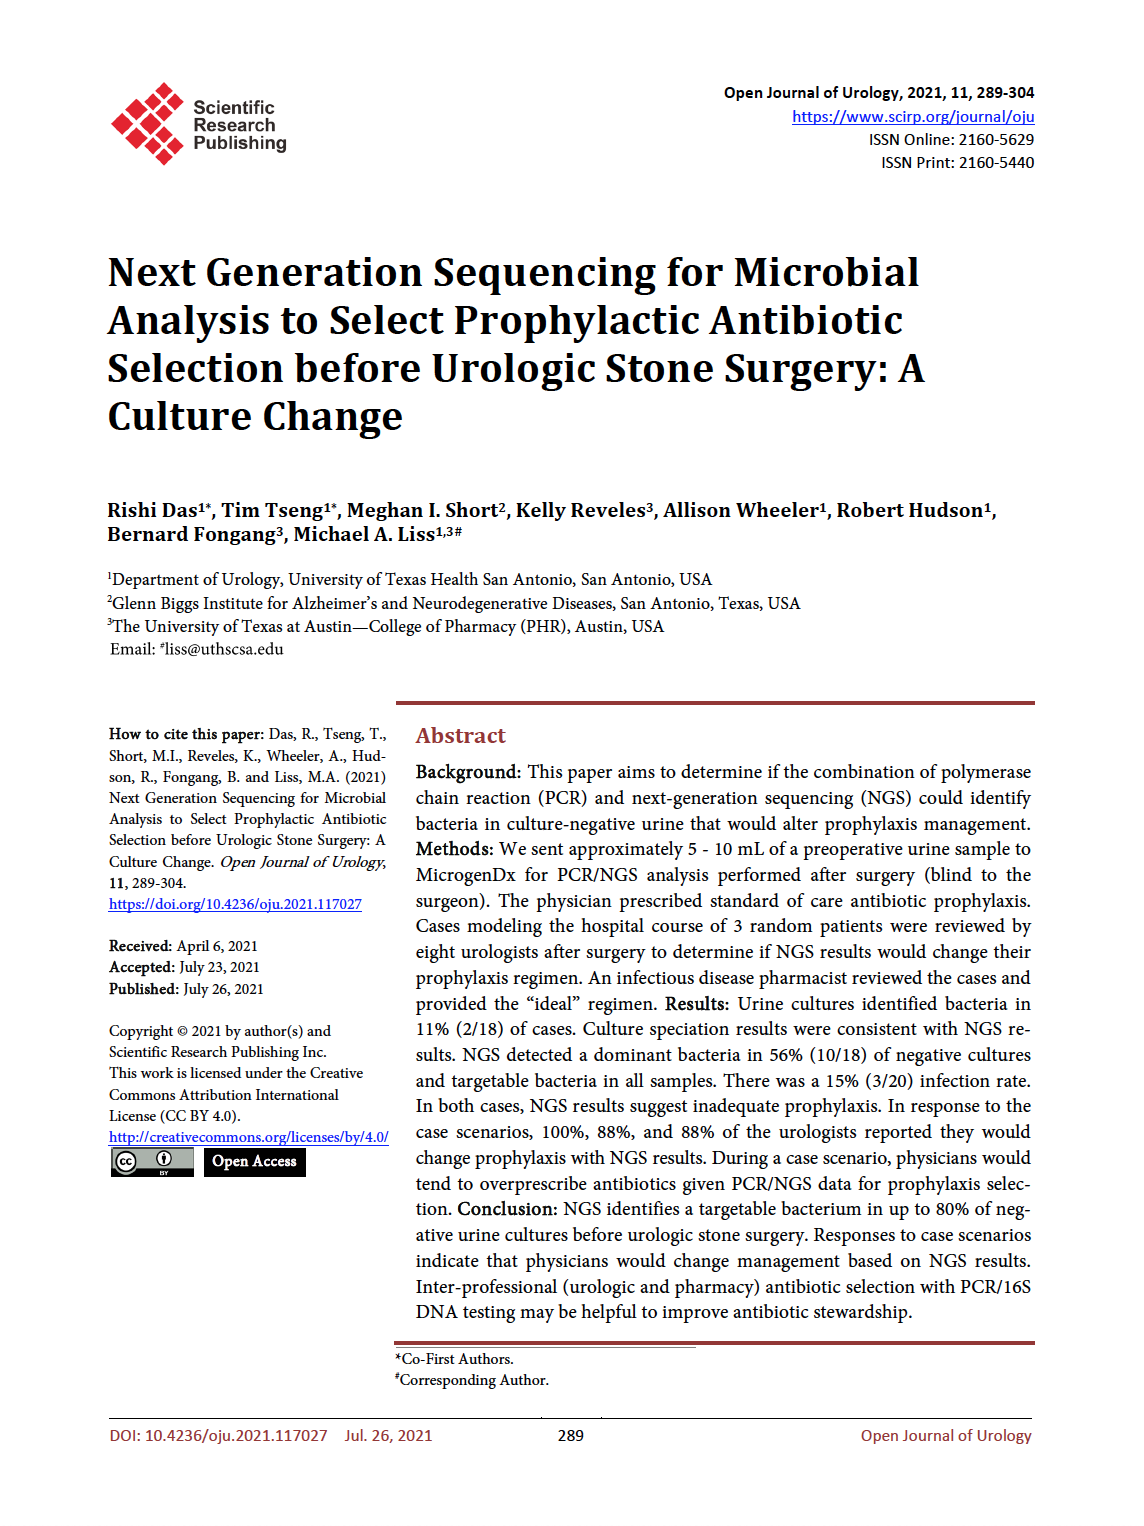 Next Generation Sequencing for Microbial Analysis to Select Prophylactic Antibiotic Selection before Urologic Stone Surgery A Culture Change Icon